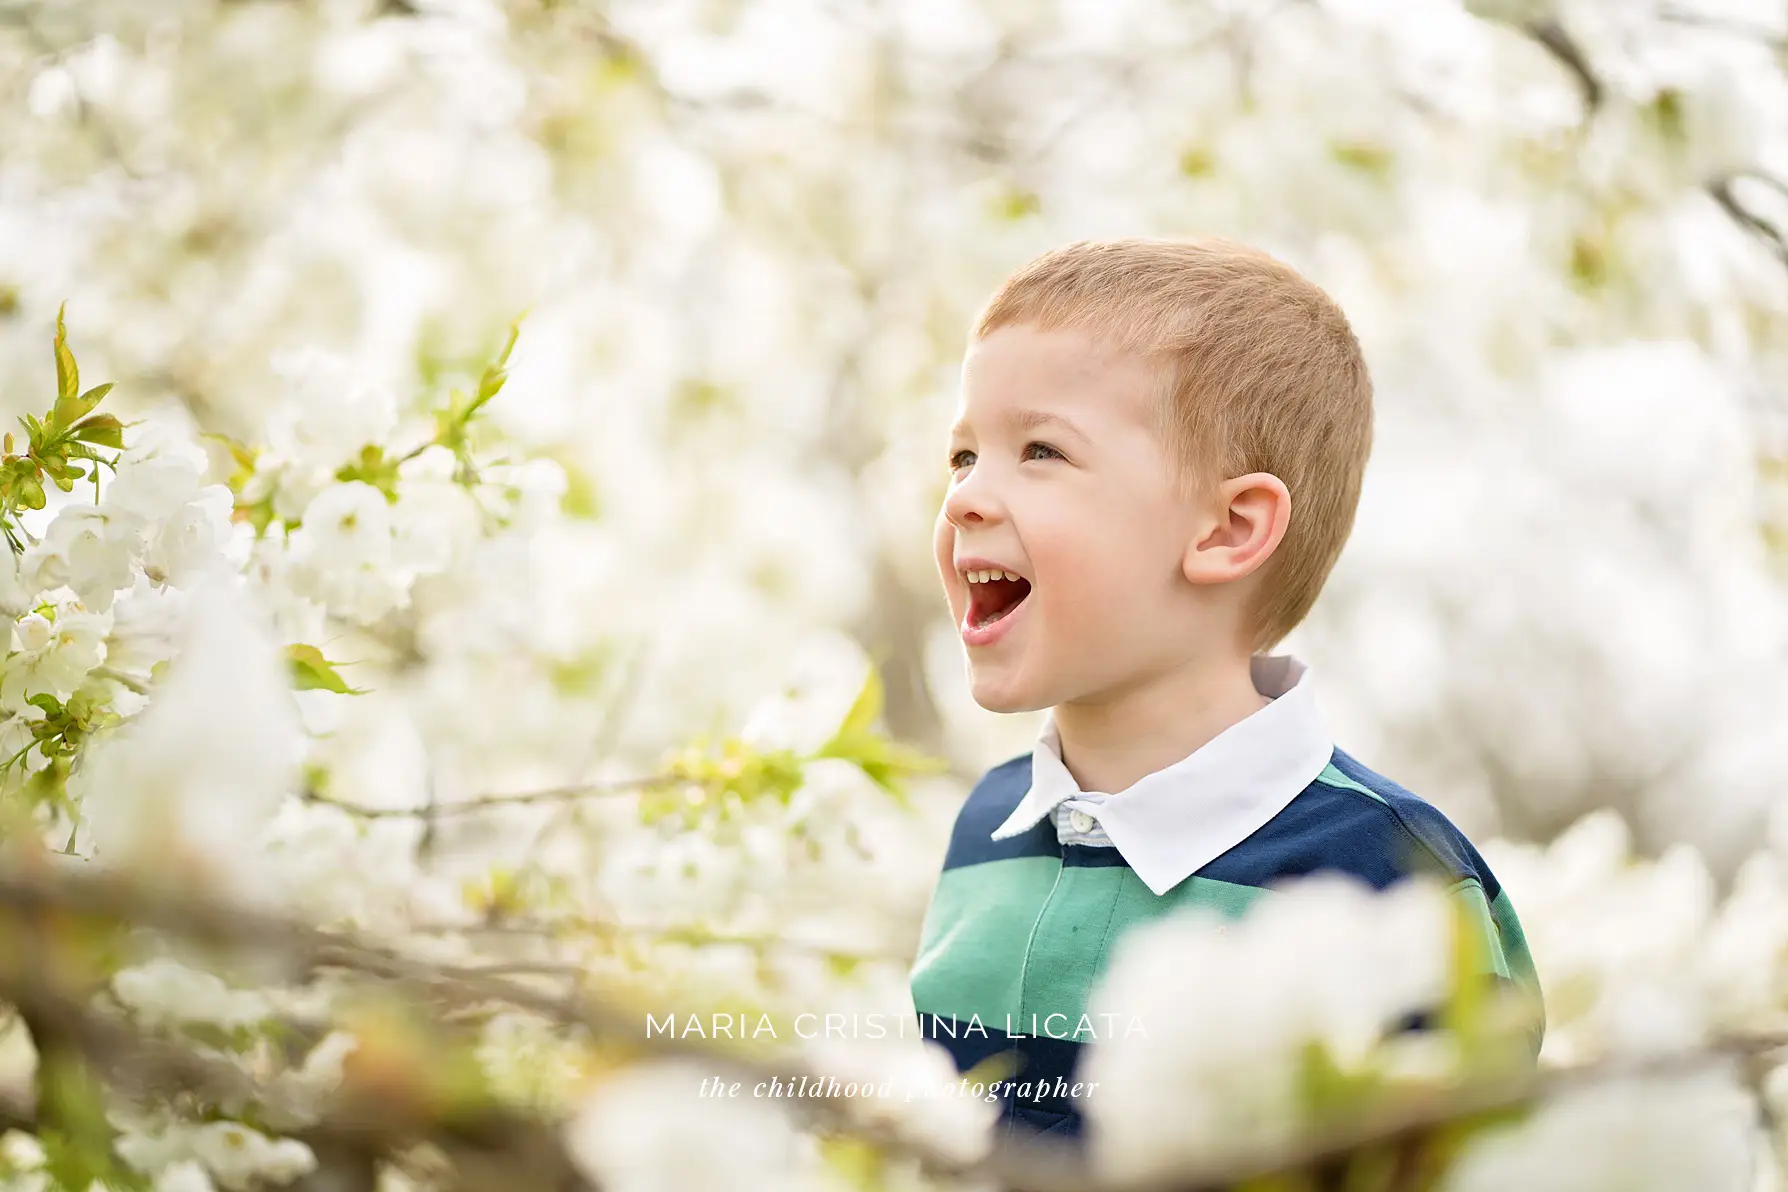 Portrait of a boy in the spring blossom in Kew Gardens